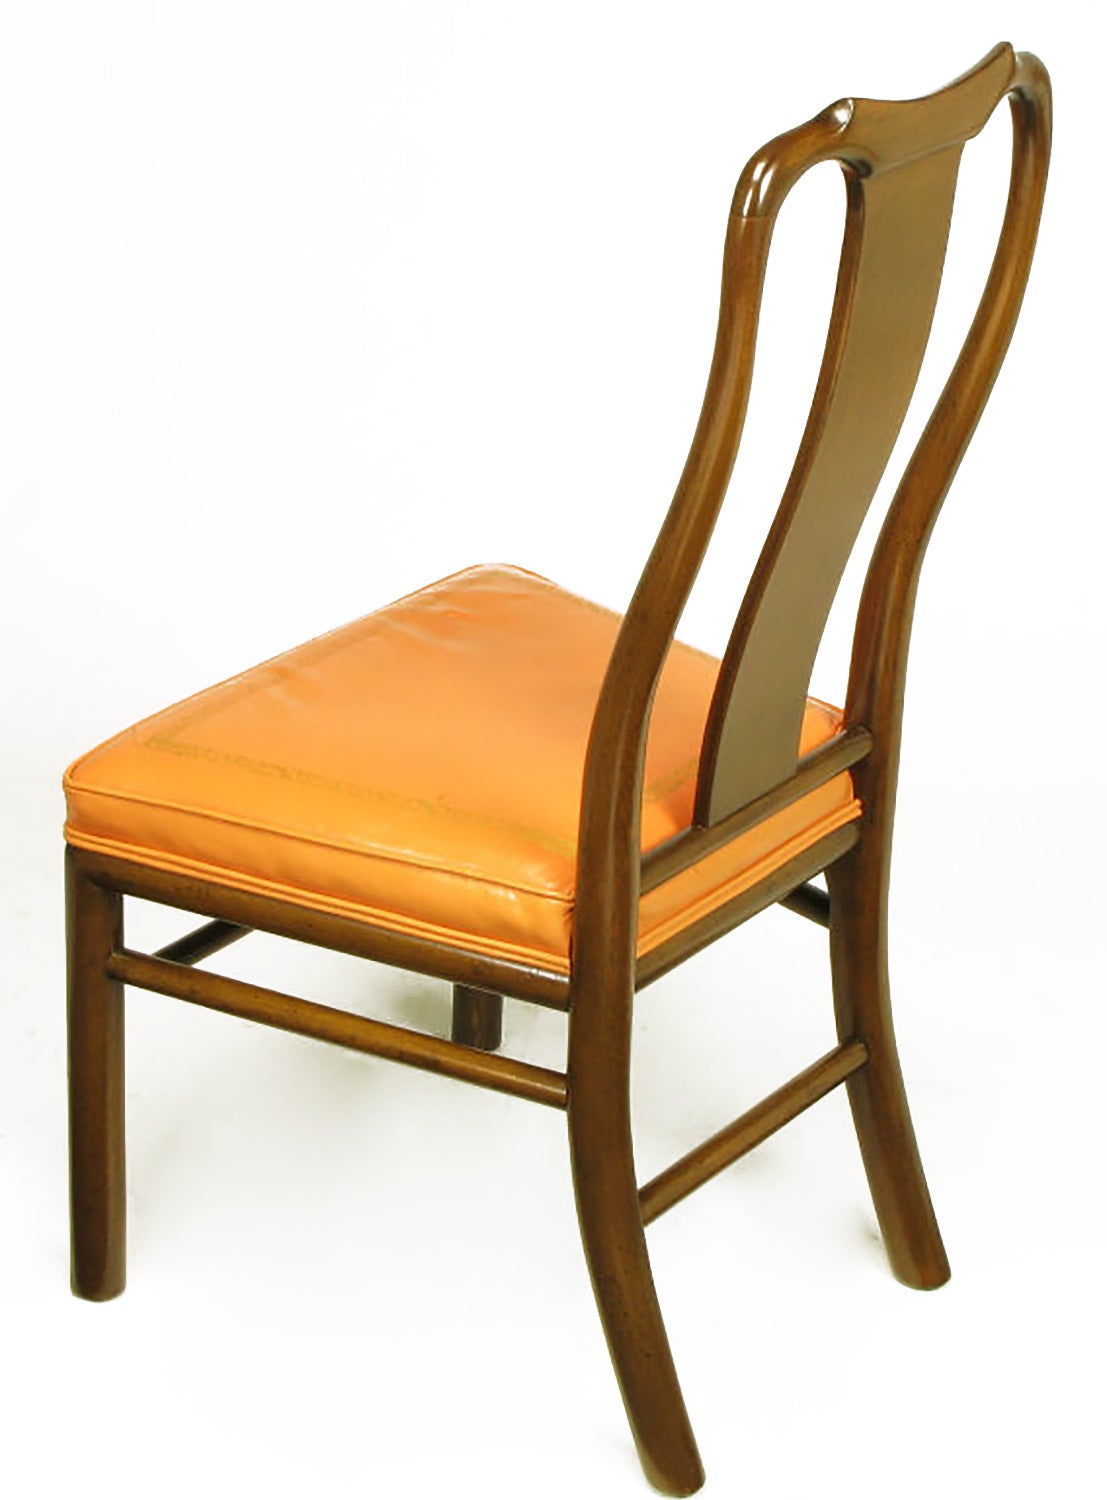 Six Walnut and Tooled Leather Splat-Back Dining Chairs In Good Condition For Sale In Chicago, IL